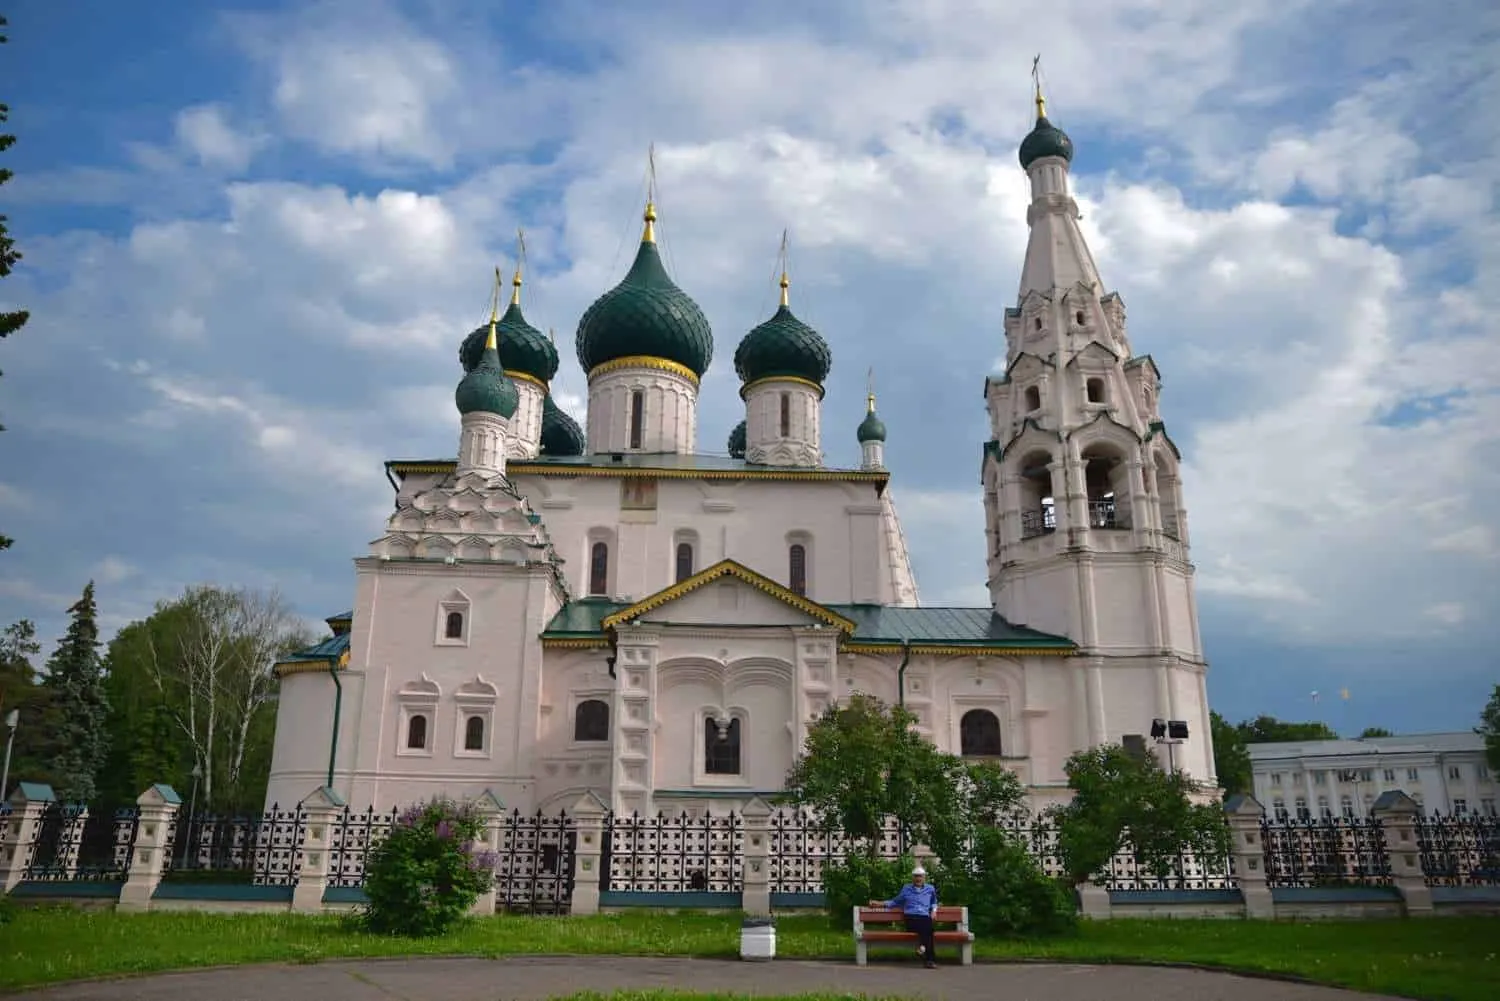 white church with gold topped green parapets in Yaroslavl Russia. these are the amazing things you will see on a viking river cruise st petersburg to moscow